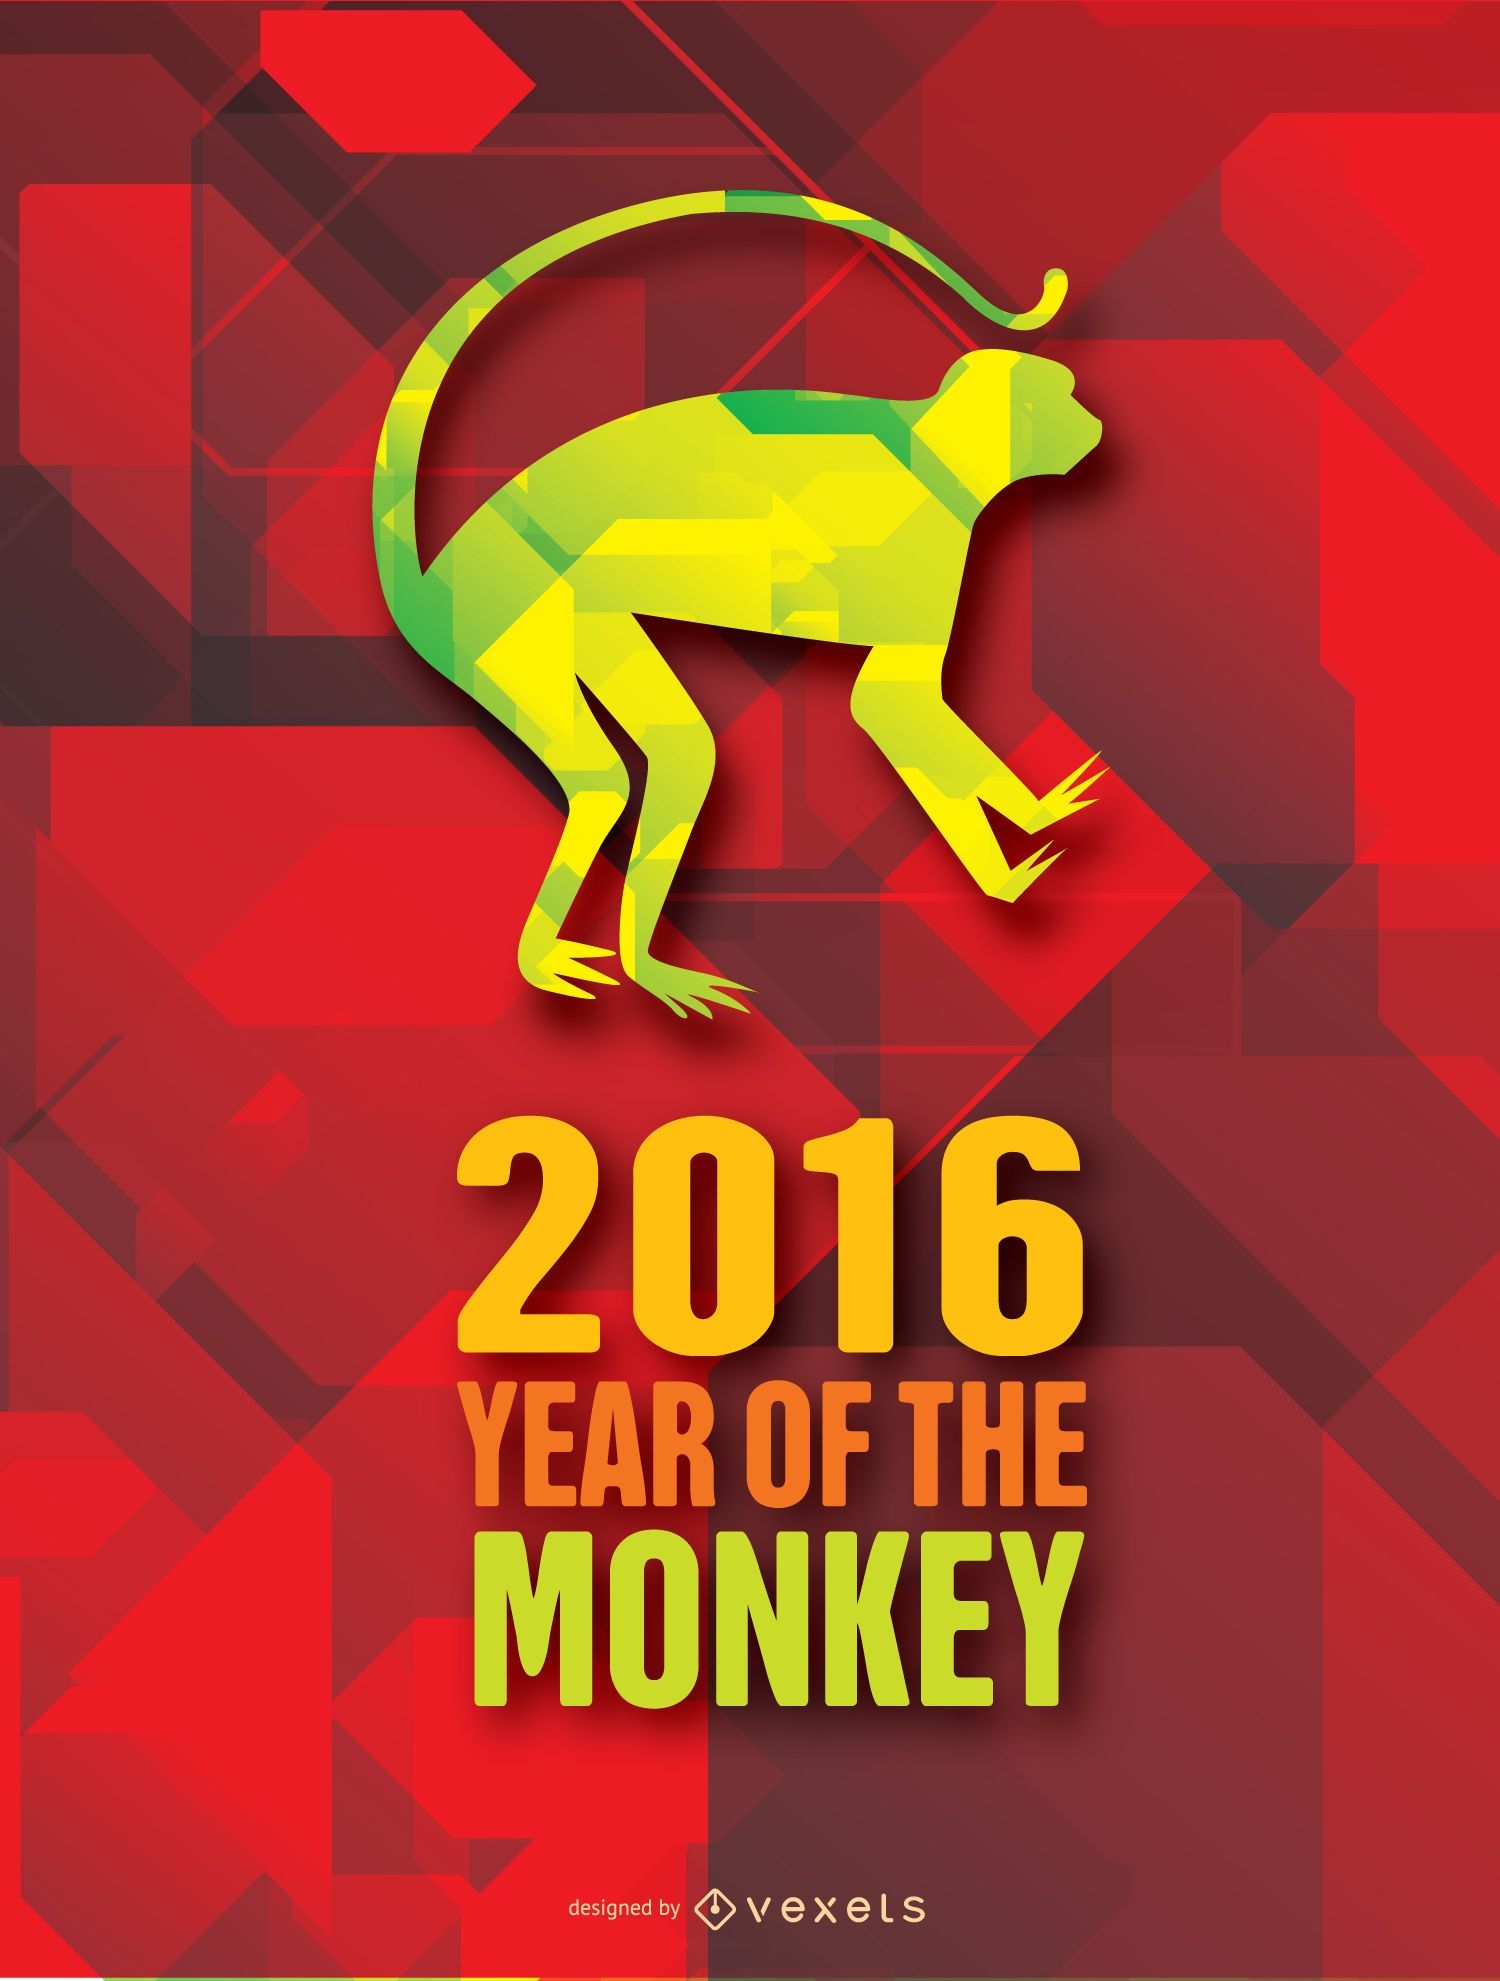 Year of the Moneky 2016 background